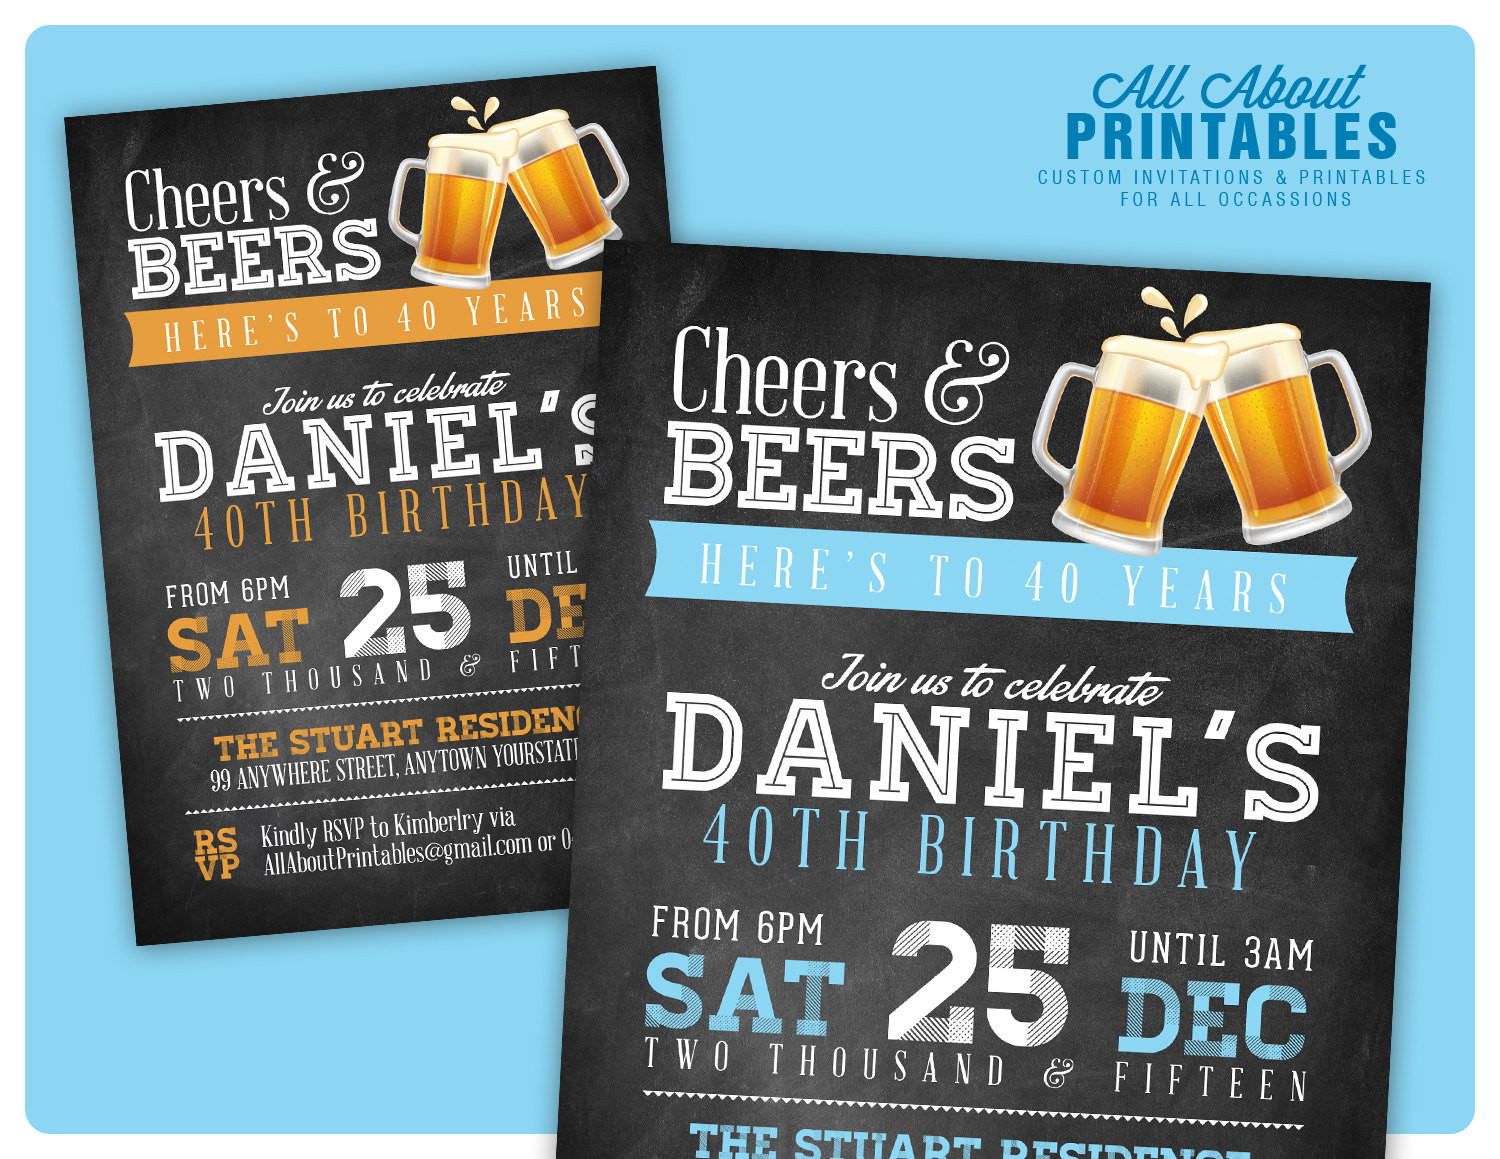 40th Birthday Party Invitations
 40th birthday invitation for Men Cheers & Beers invitation